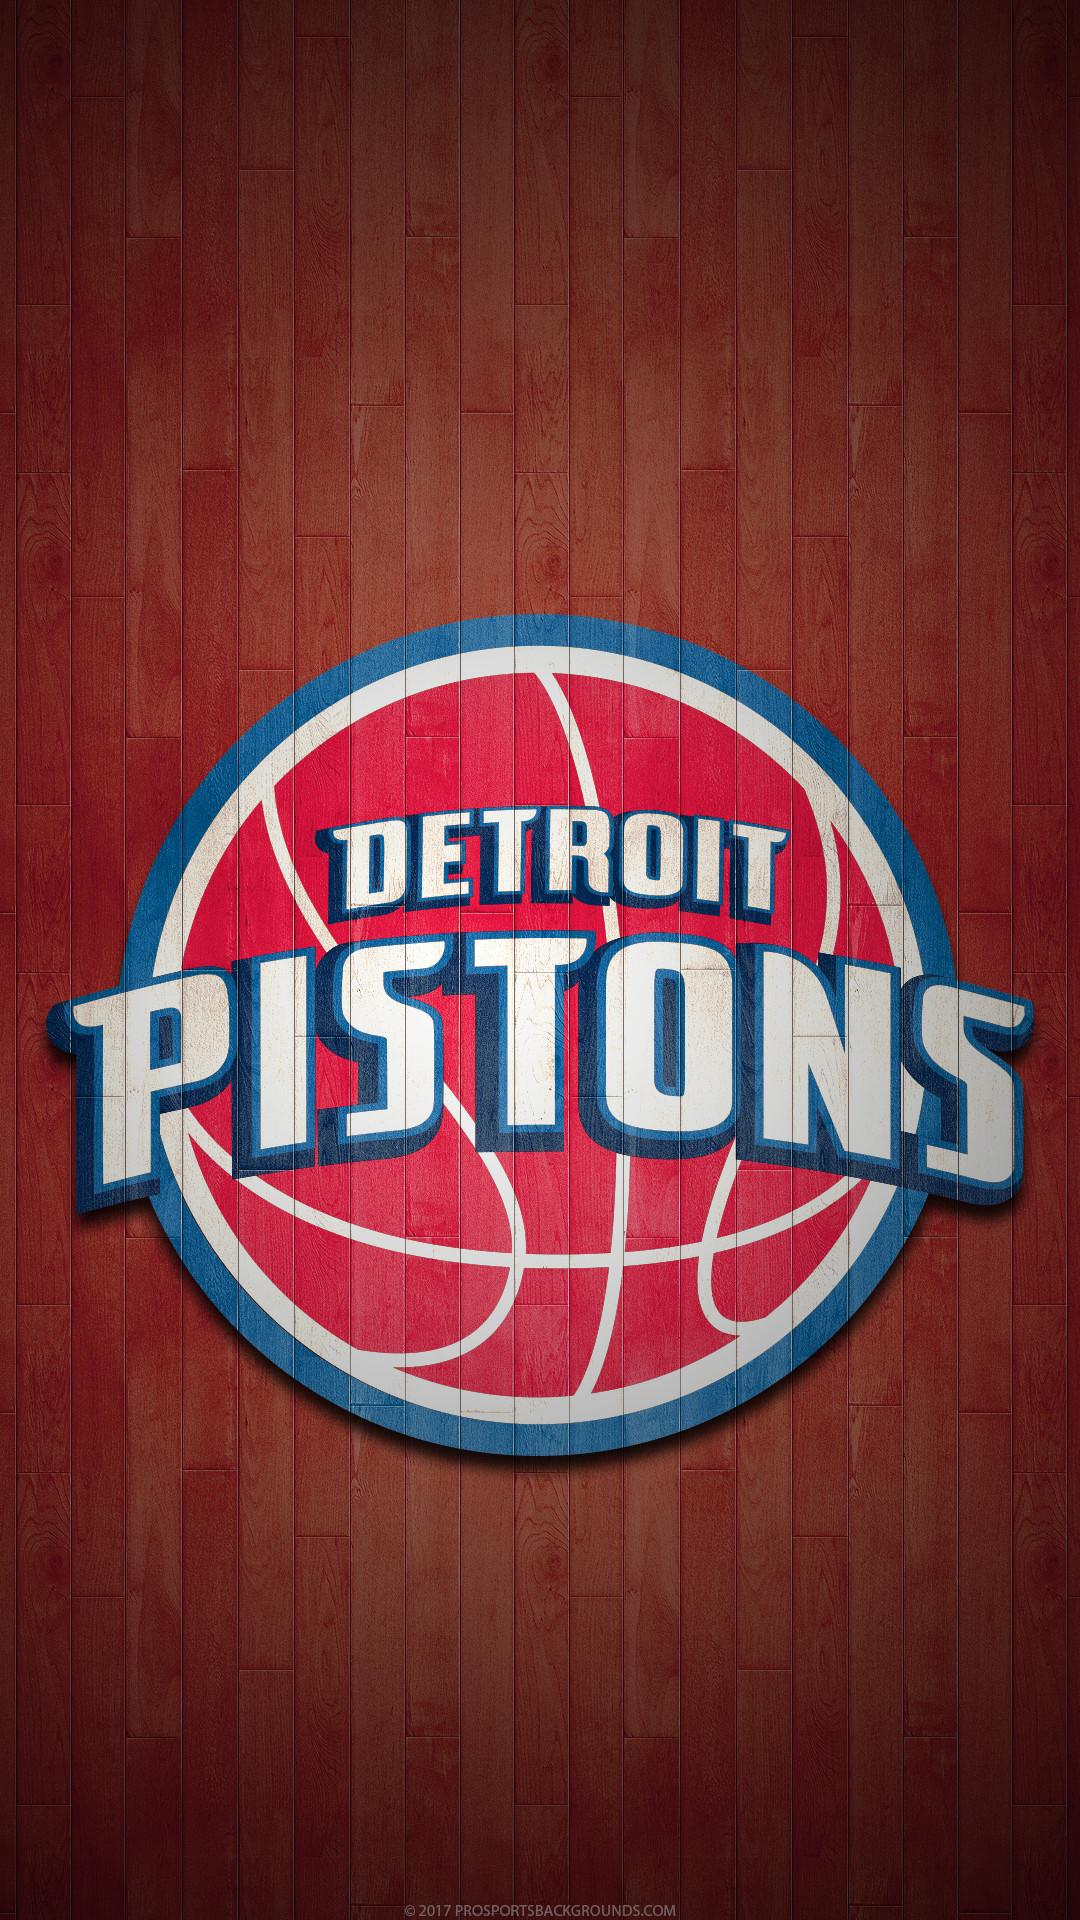 Detroit Pistons on Twitter  Fresh wallpapers for our Hoops for Troops  night  WallpaperWednesdays  Pistons httpstcojUrIOWnmEx  Twitter